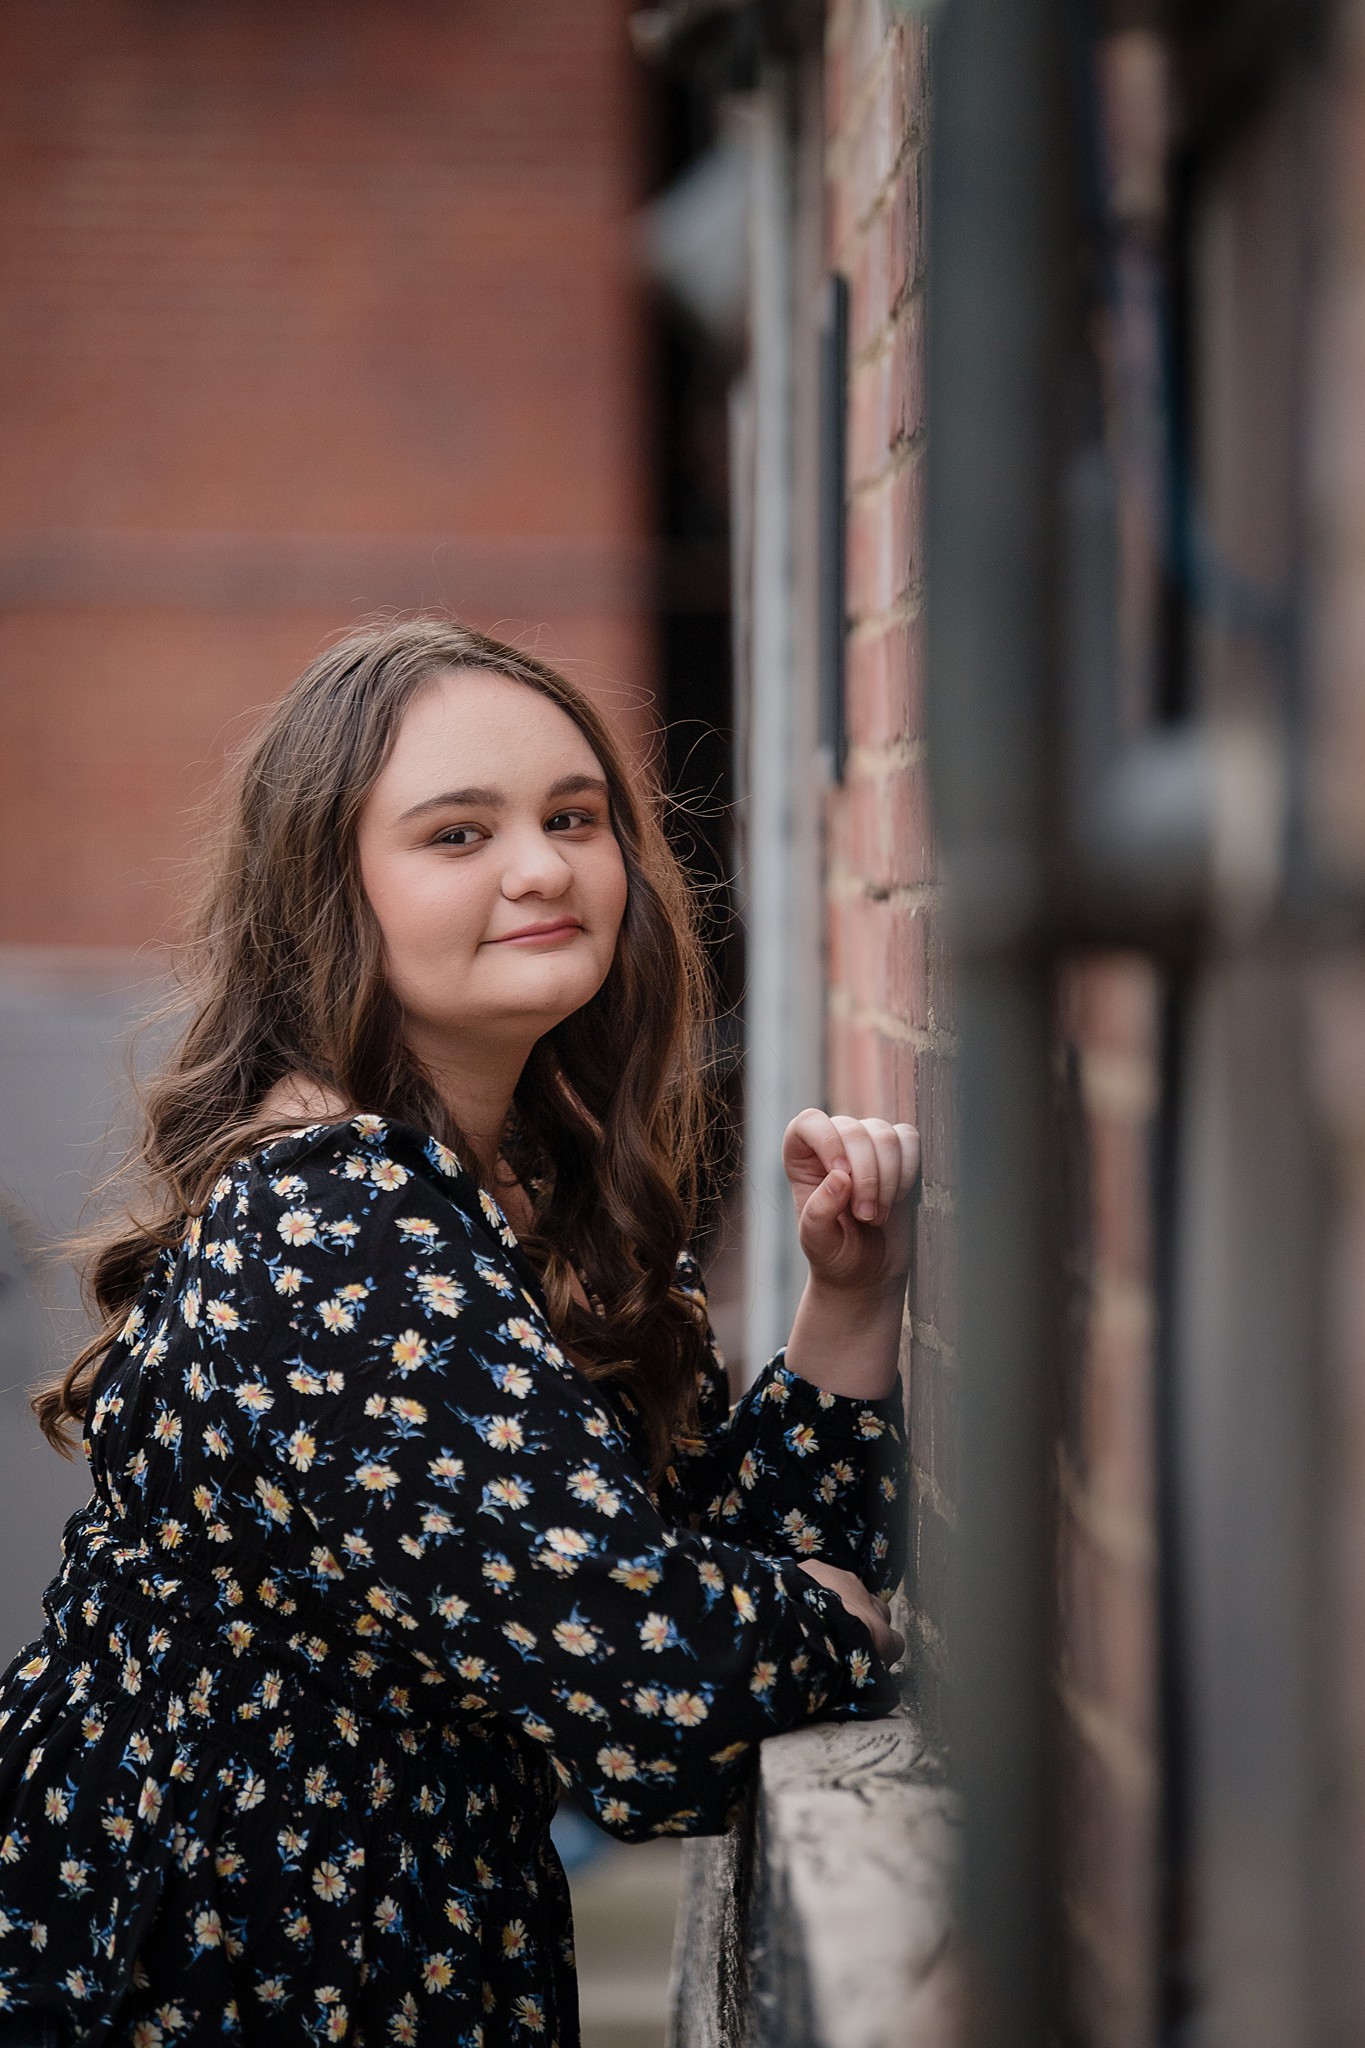 bayleigh's senior photo session in Parkersburg, WV.